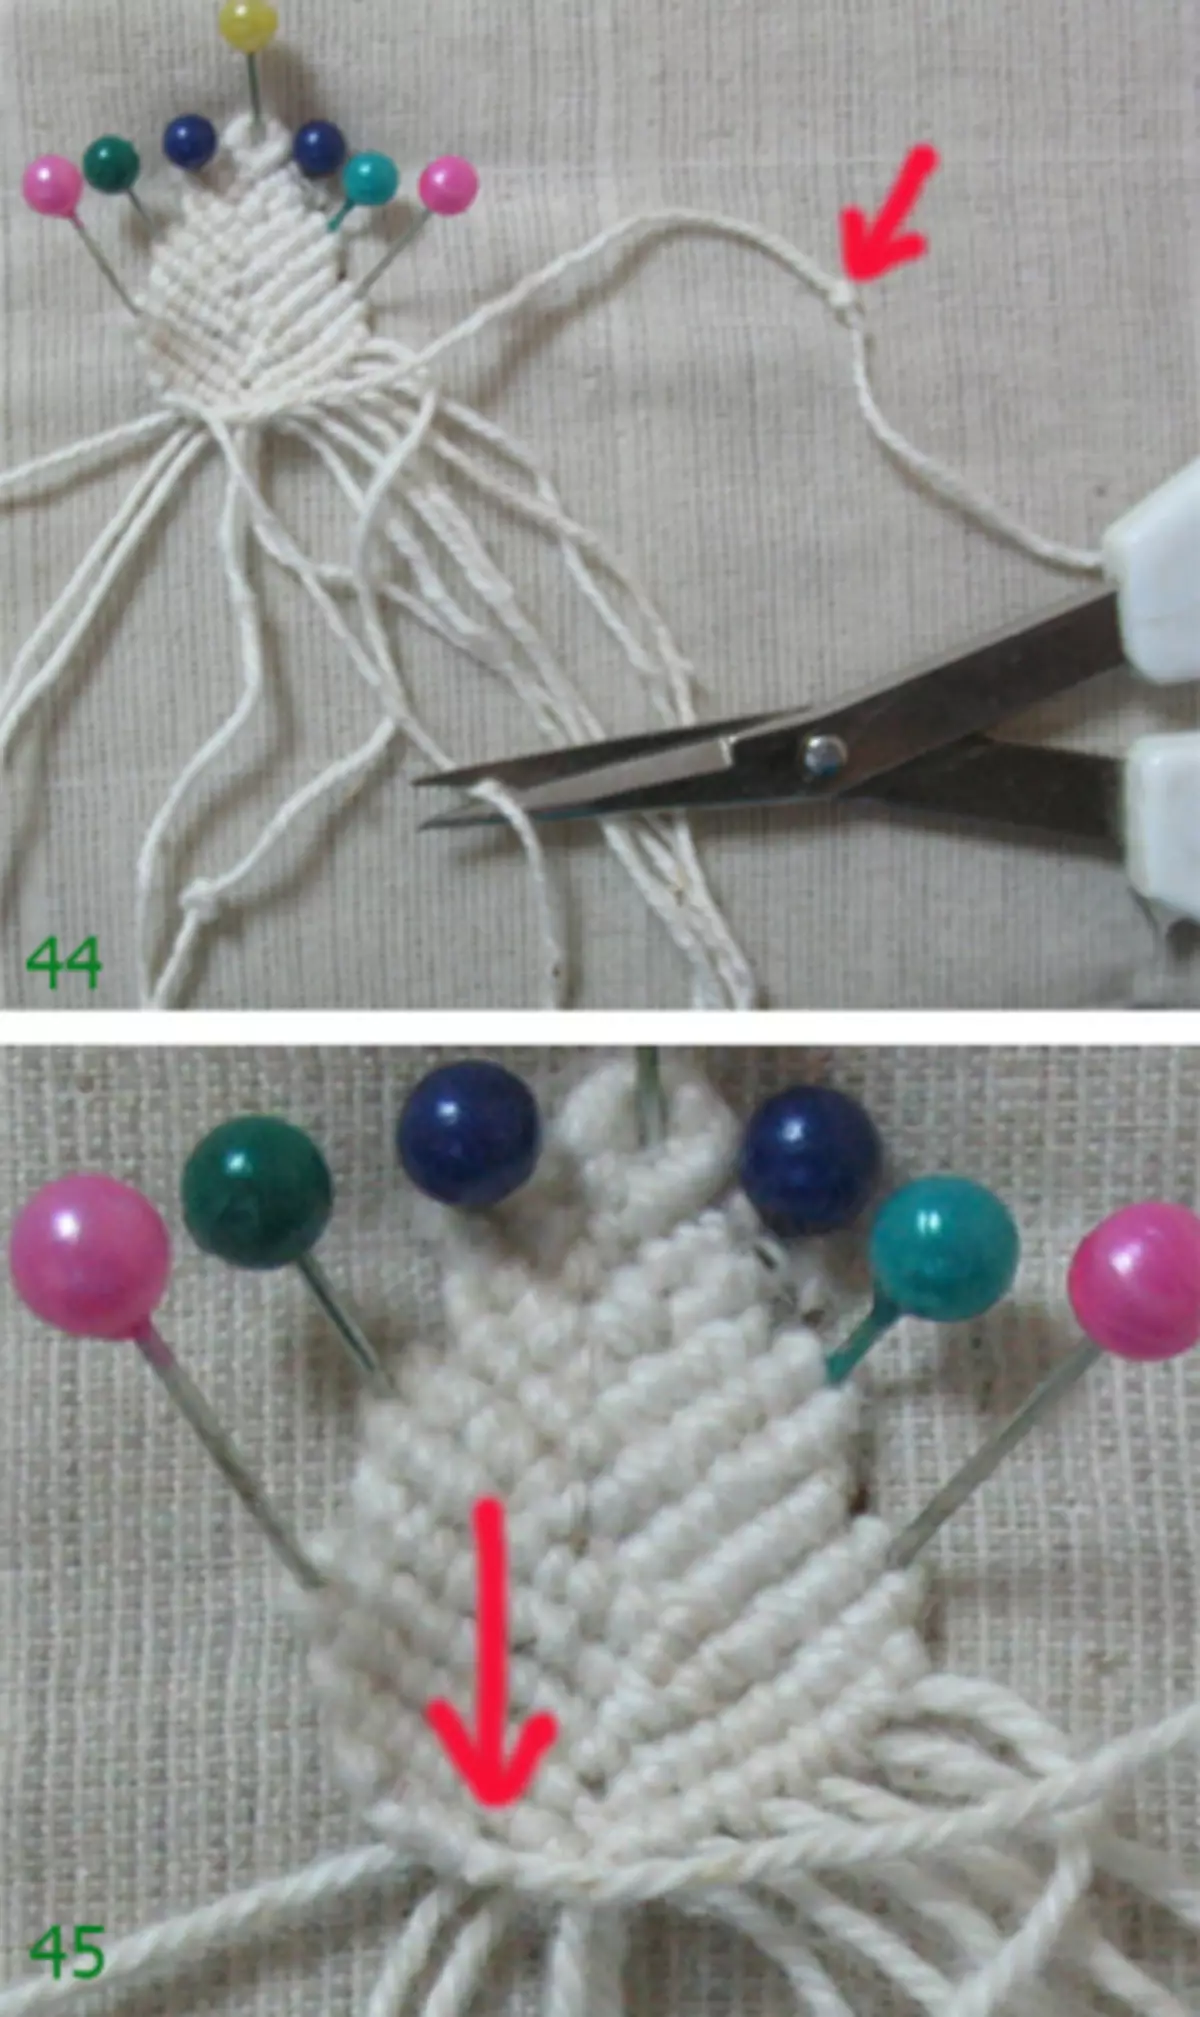 Scheme of weaving macrame for beginners with photos and video